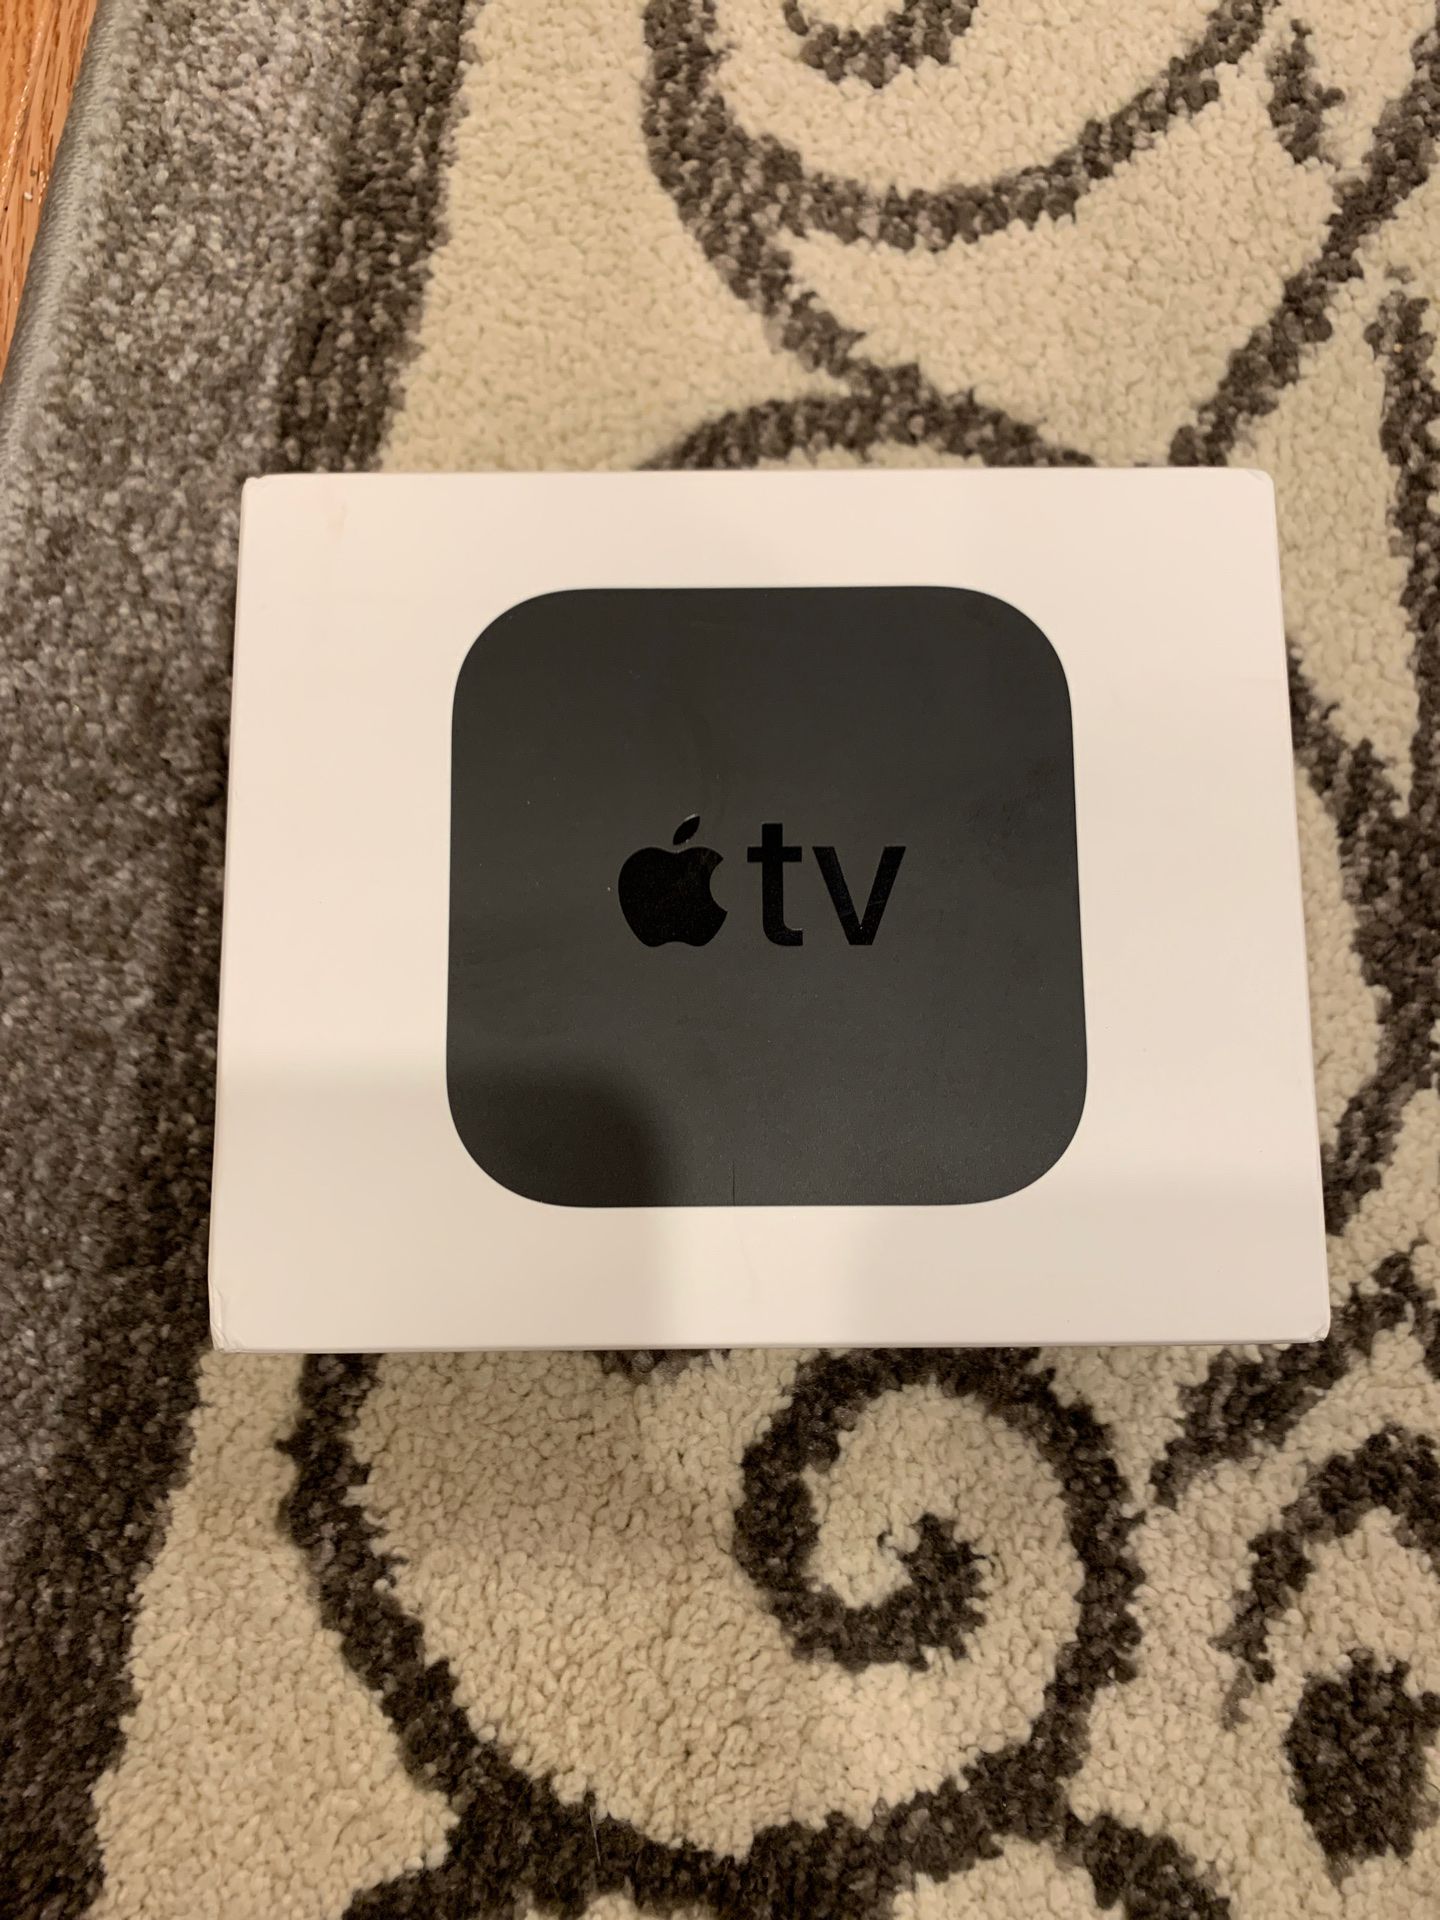 Apple TV 4K like new condition